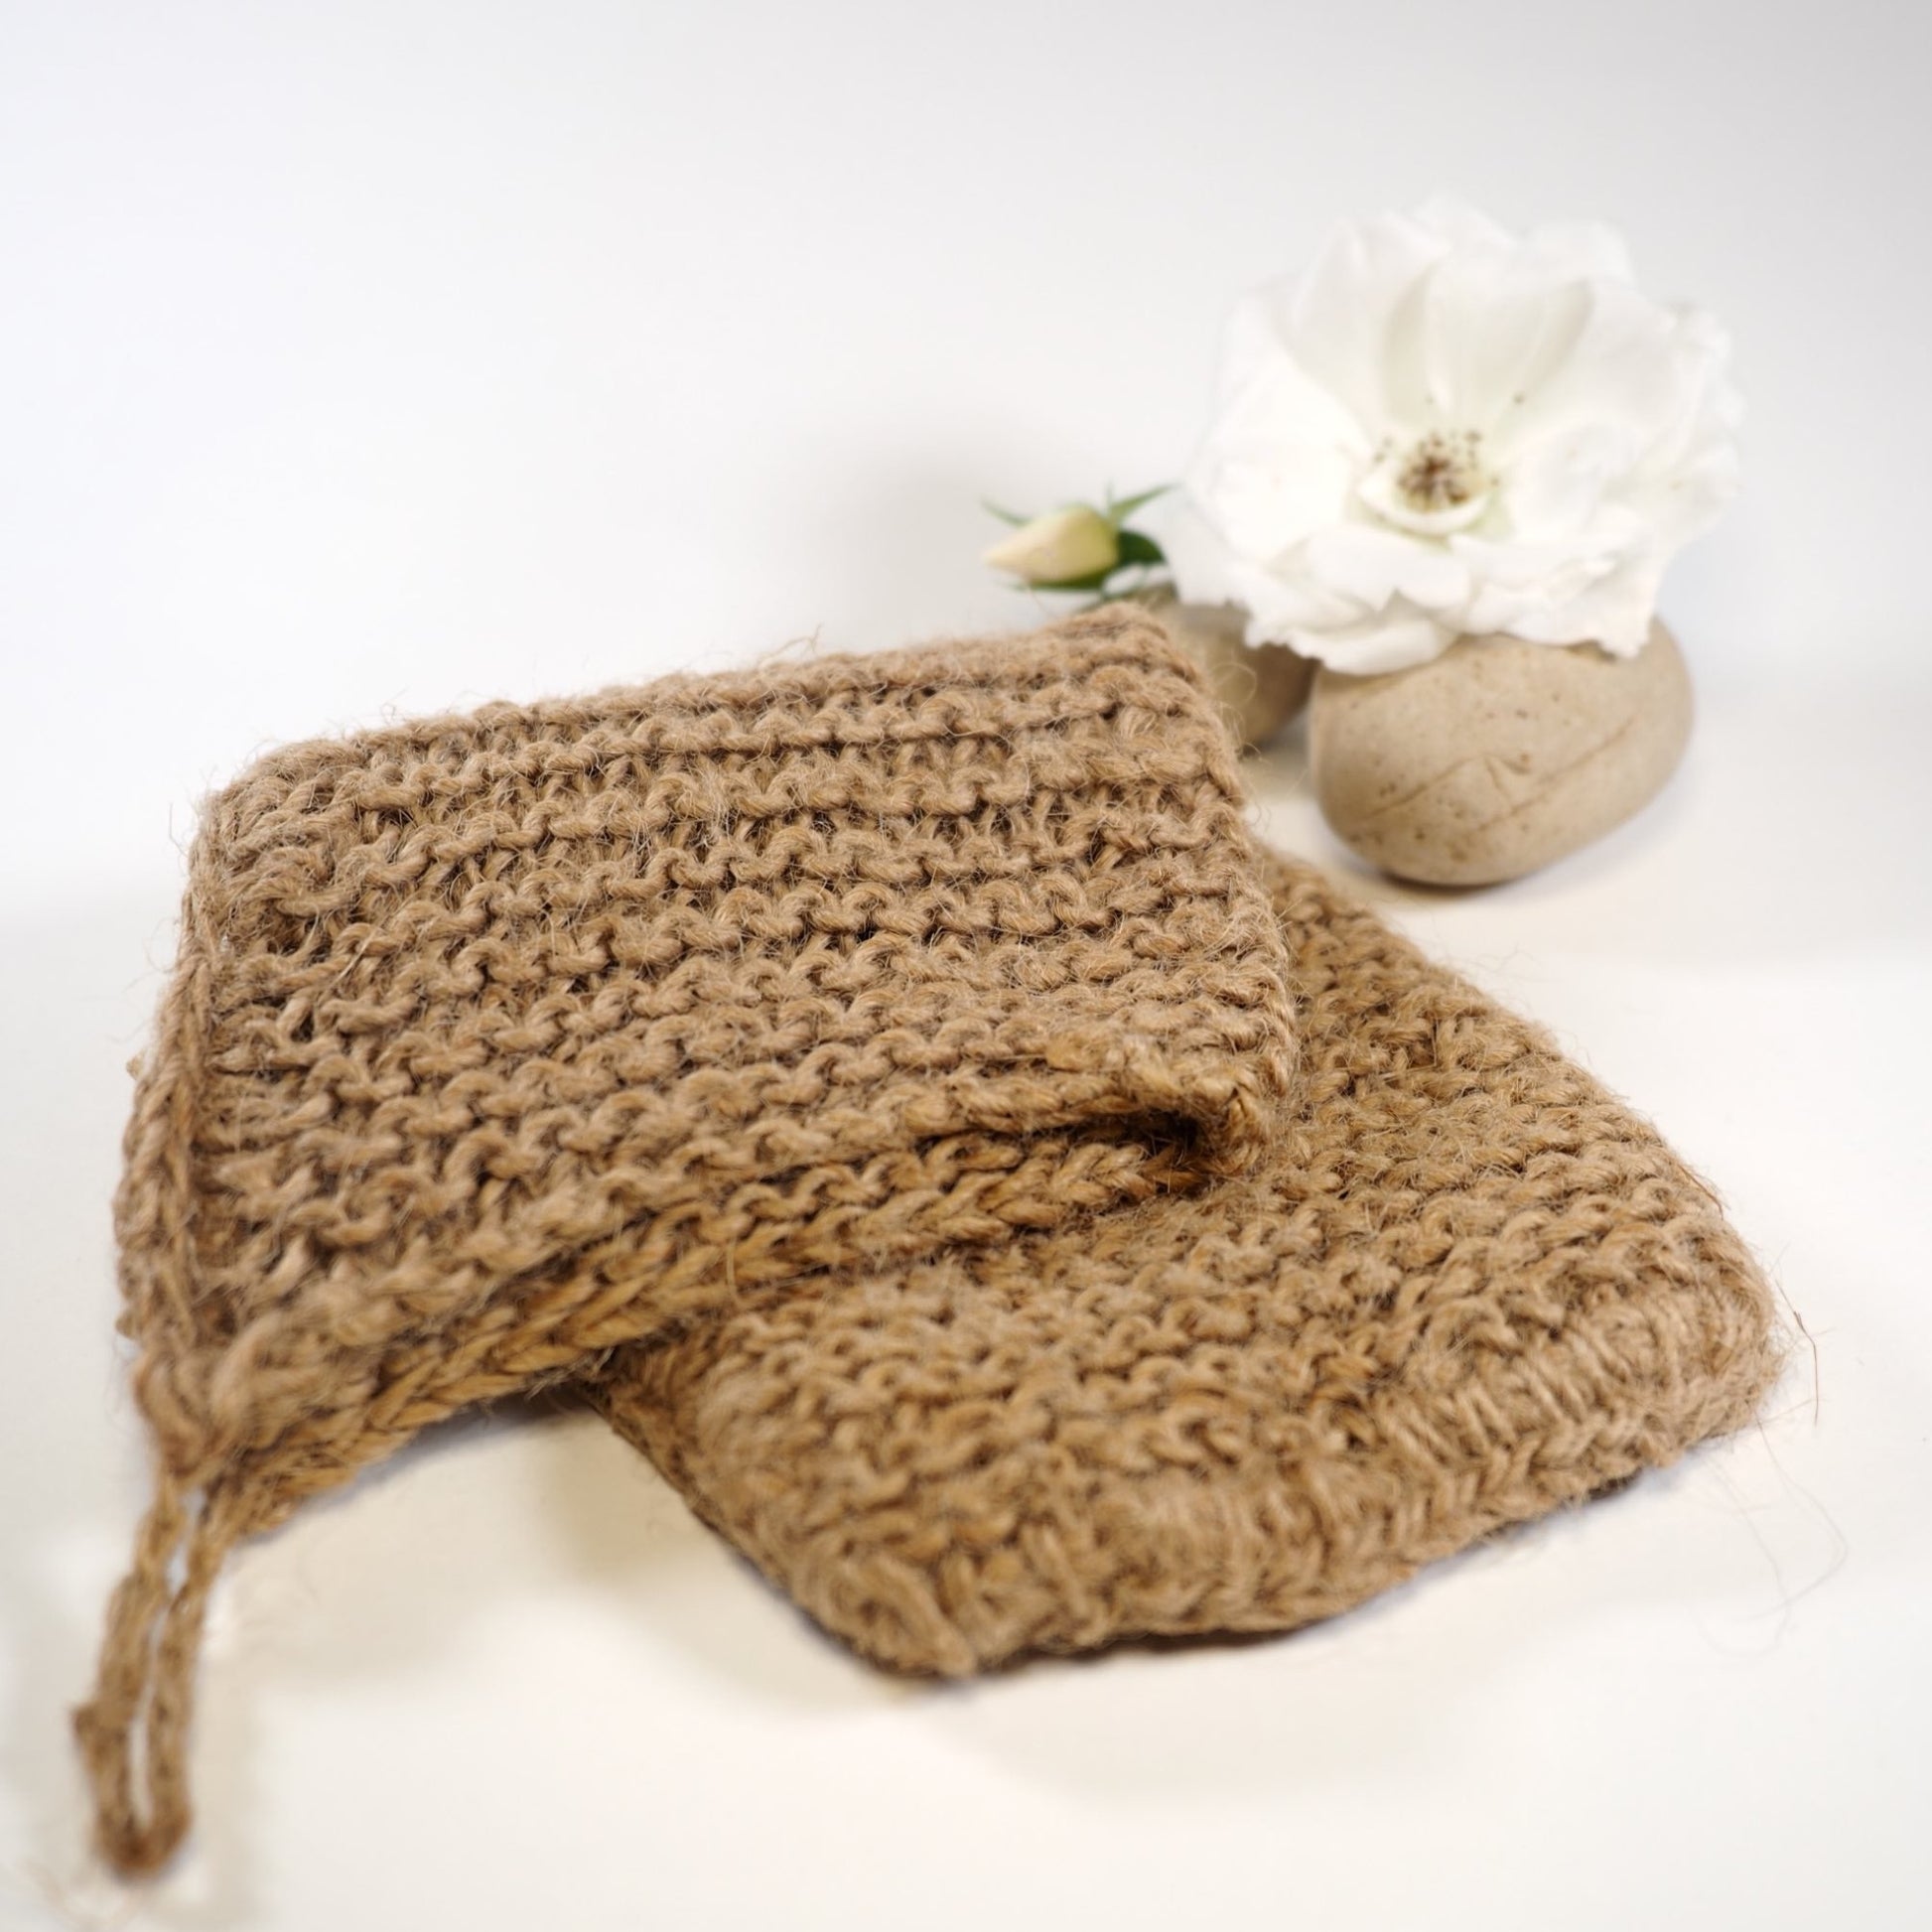 Hand crocheted jute exfoliating mitt folded with rock and rose